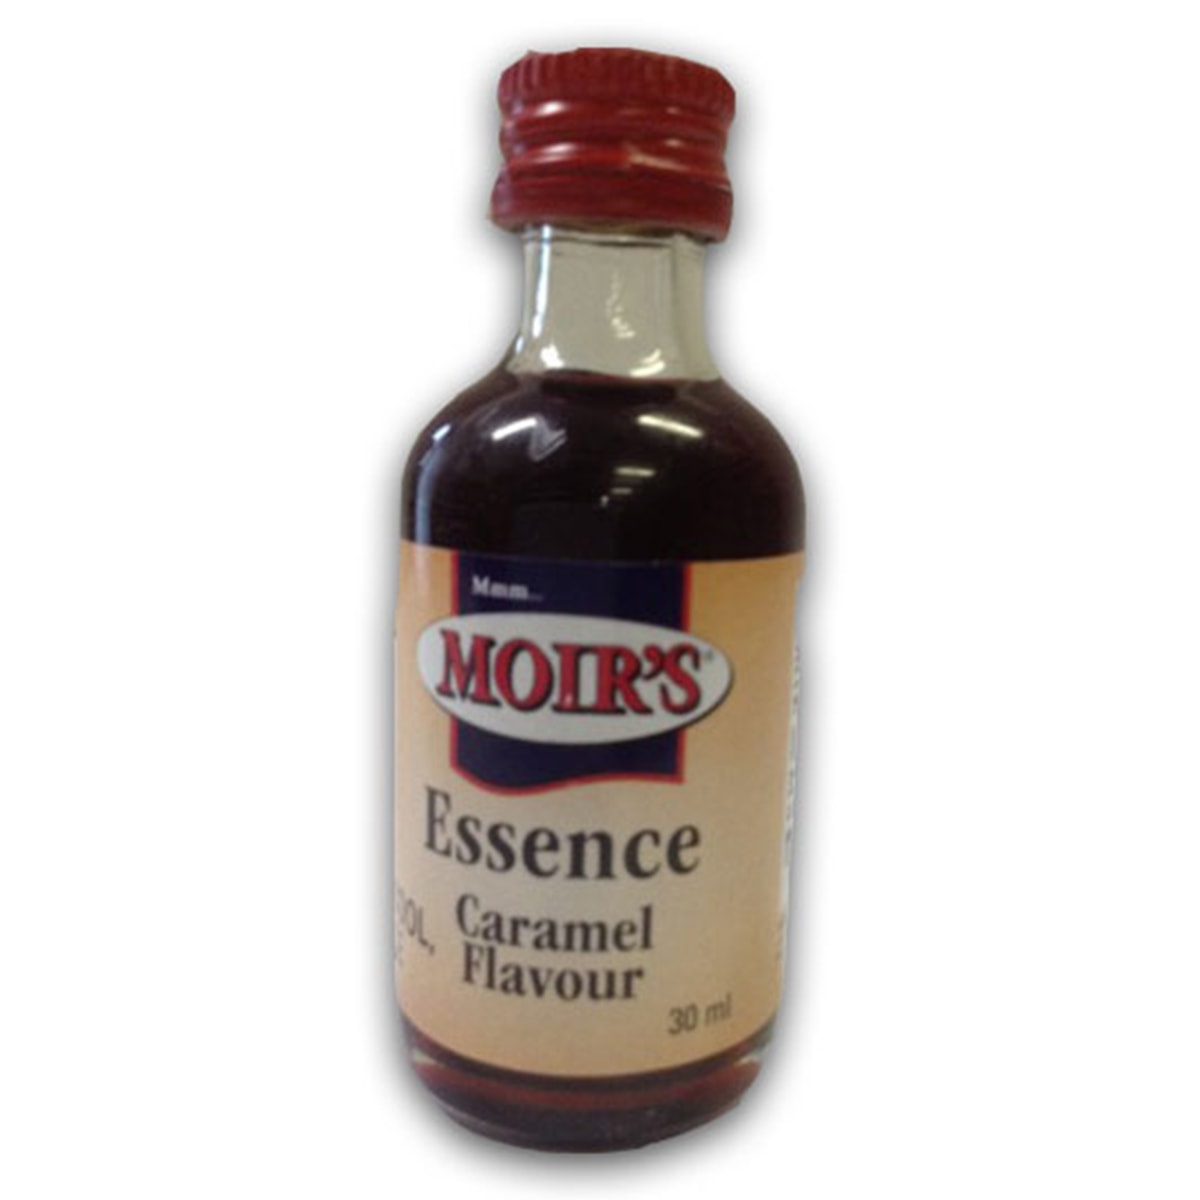 Buy Moirs Caramel Essence Flavour - 30 ml